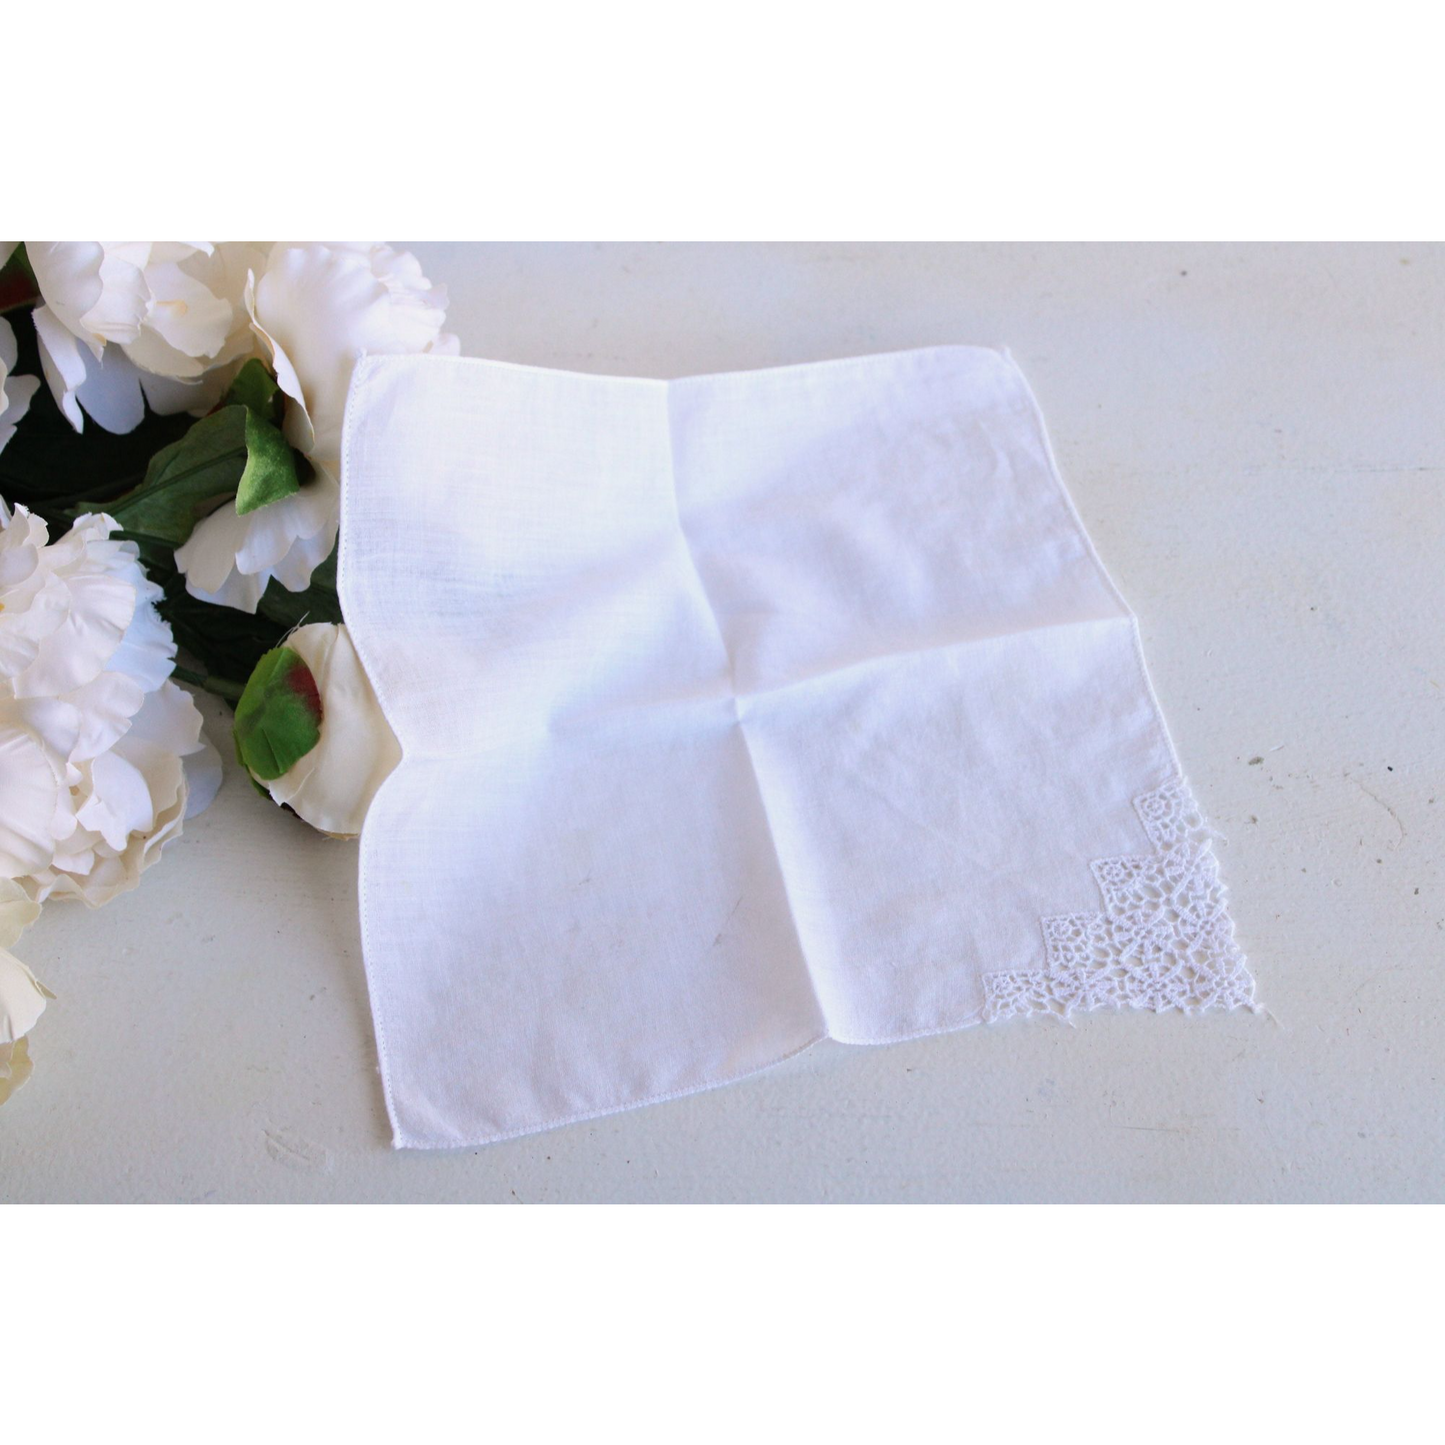 Vintage 1940s 1950s Handkerchief with a White Lace Corner